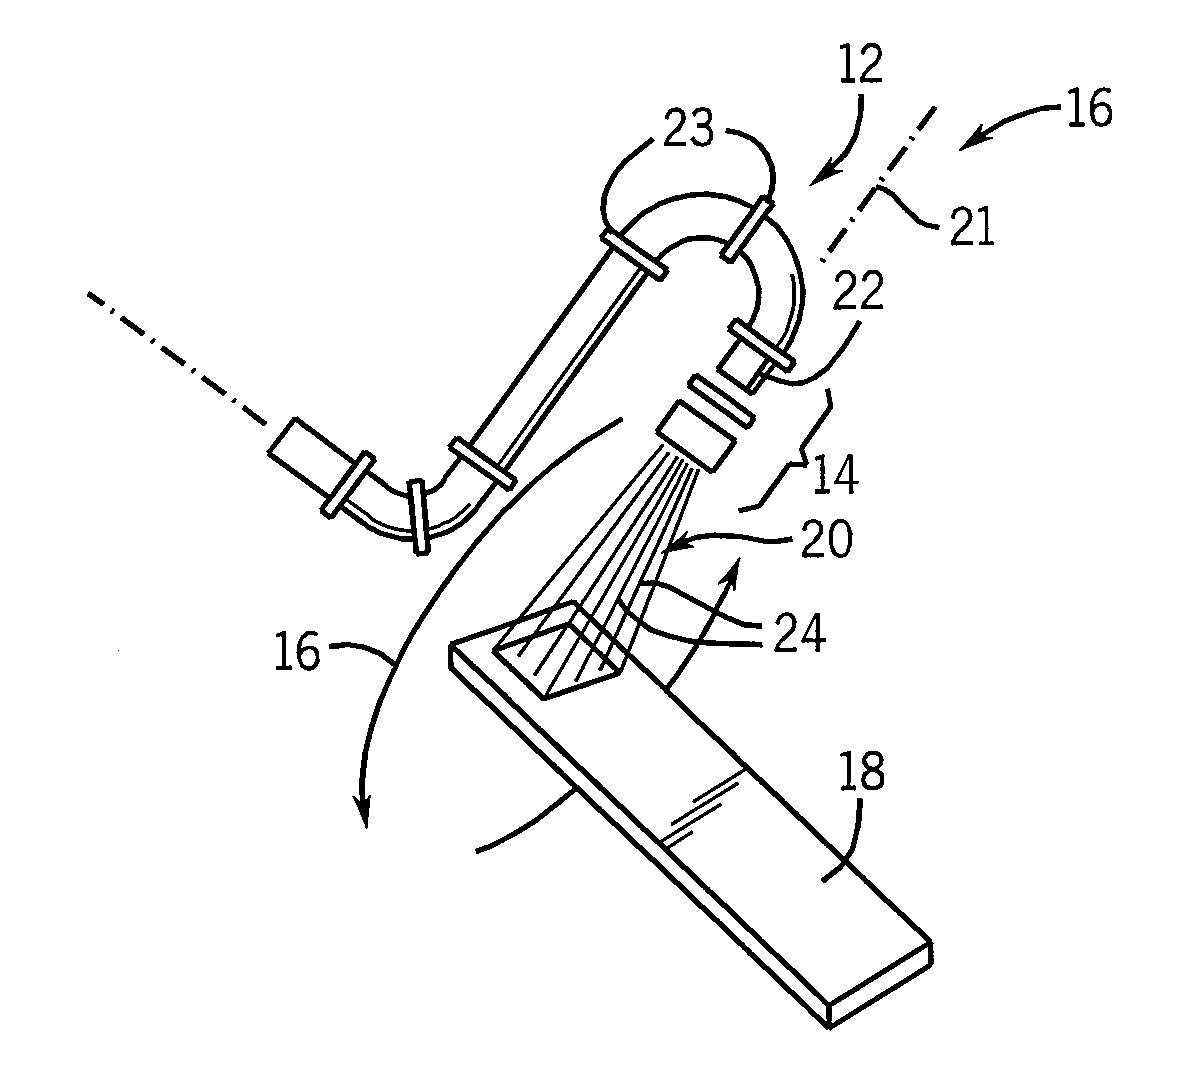 Areal modulator for intensity modulated radiation therapy